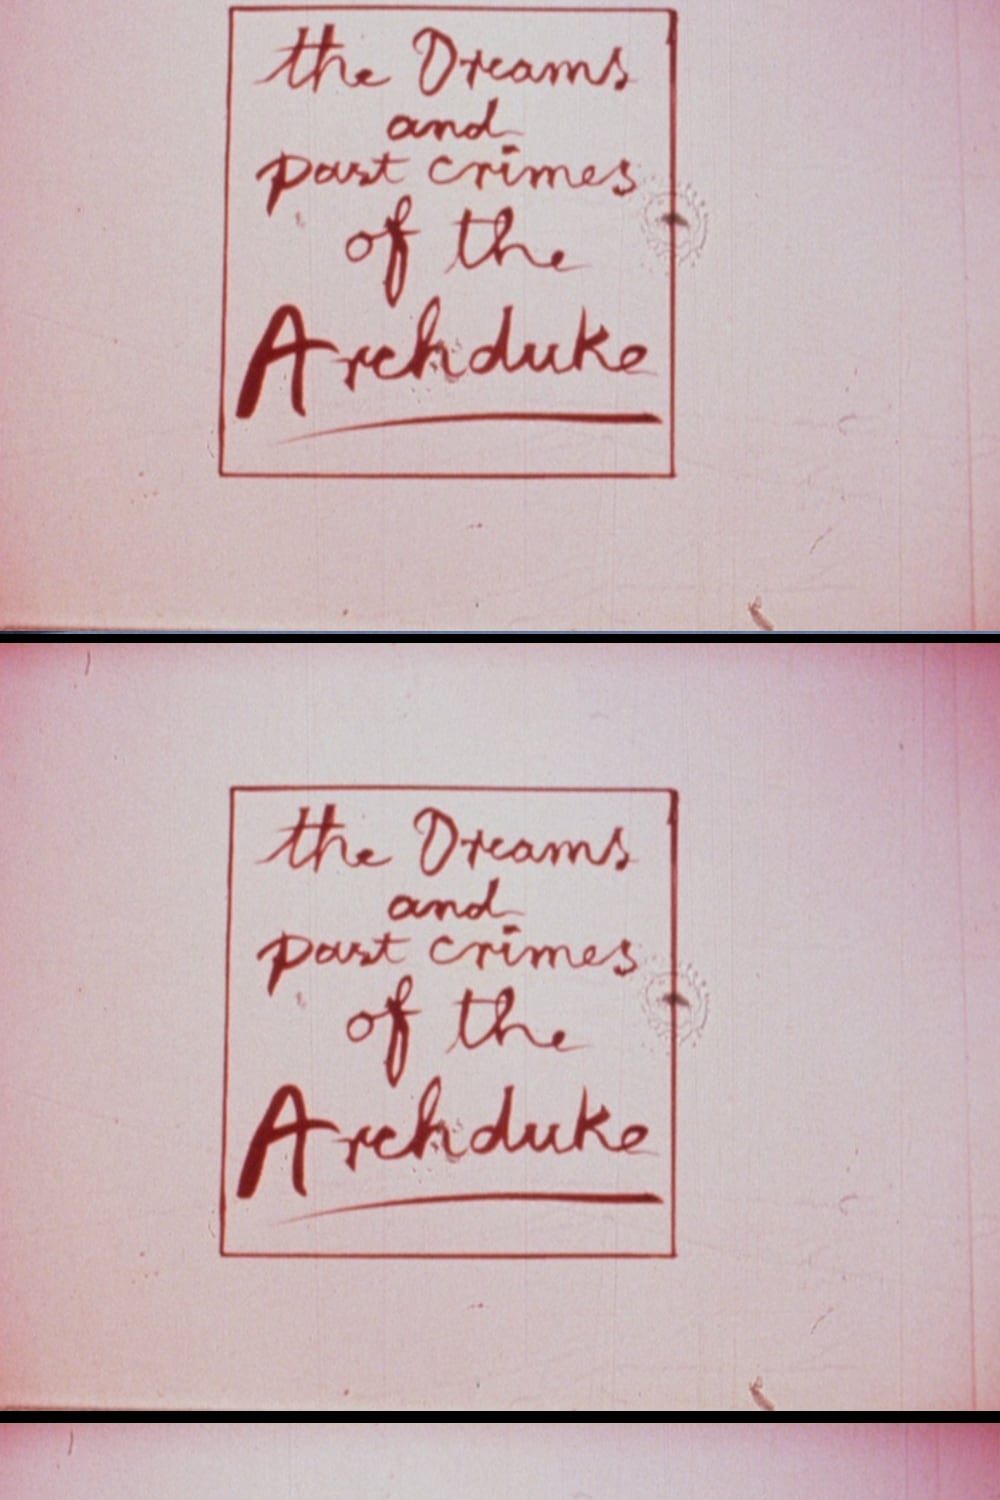 The Dreams and Past Crimes of the Archduke